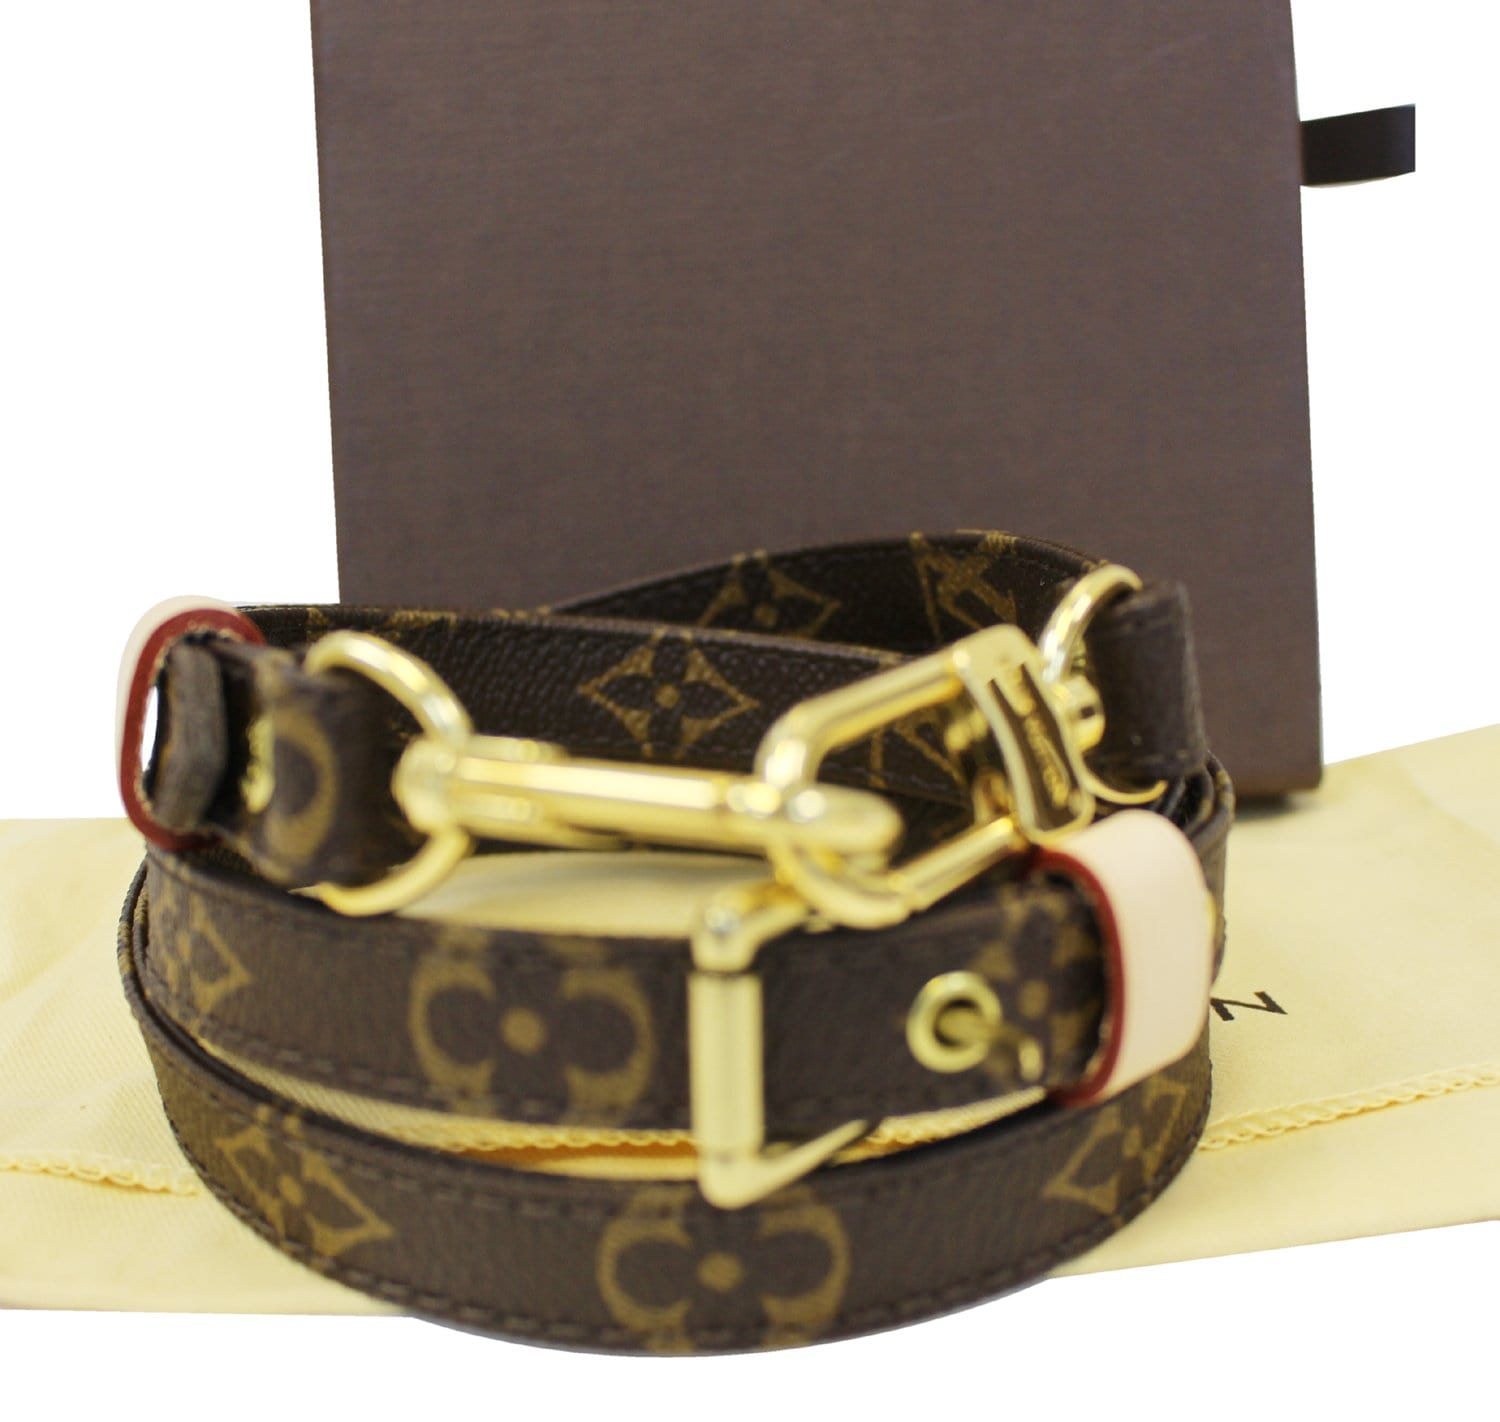 Where can I find a chain and strap similar to the one that comes with the Pochette  Metis EW? : r/Louisvuitton